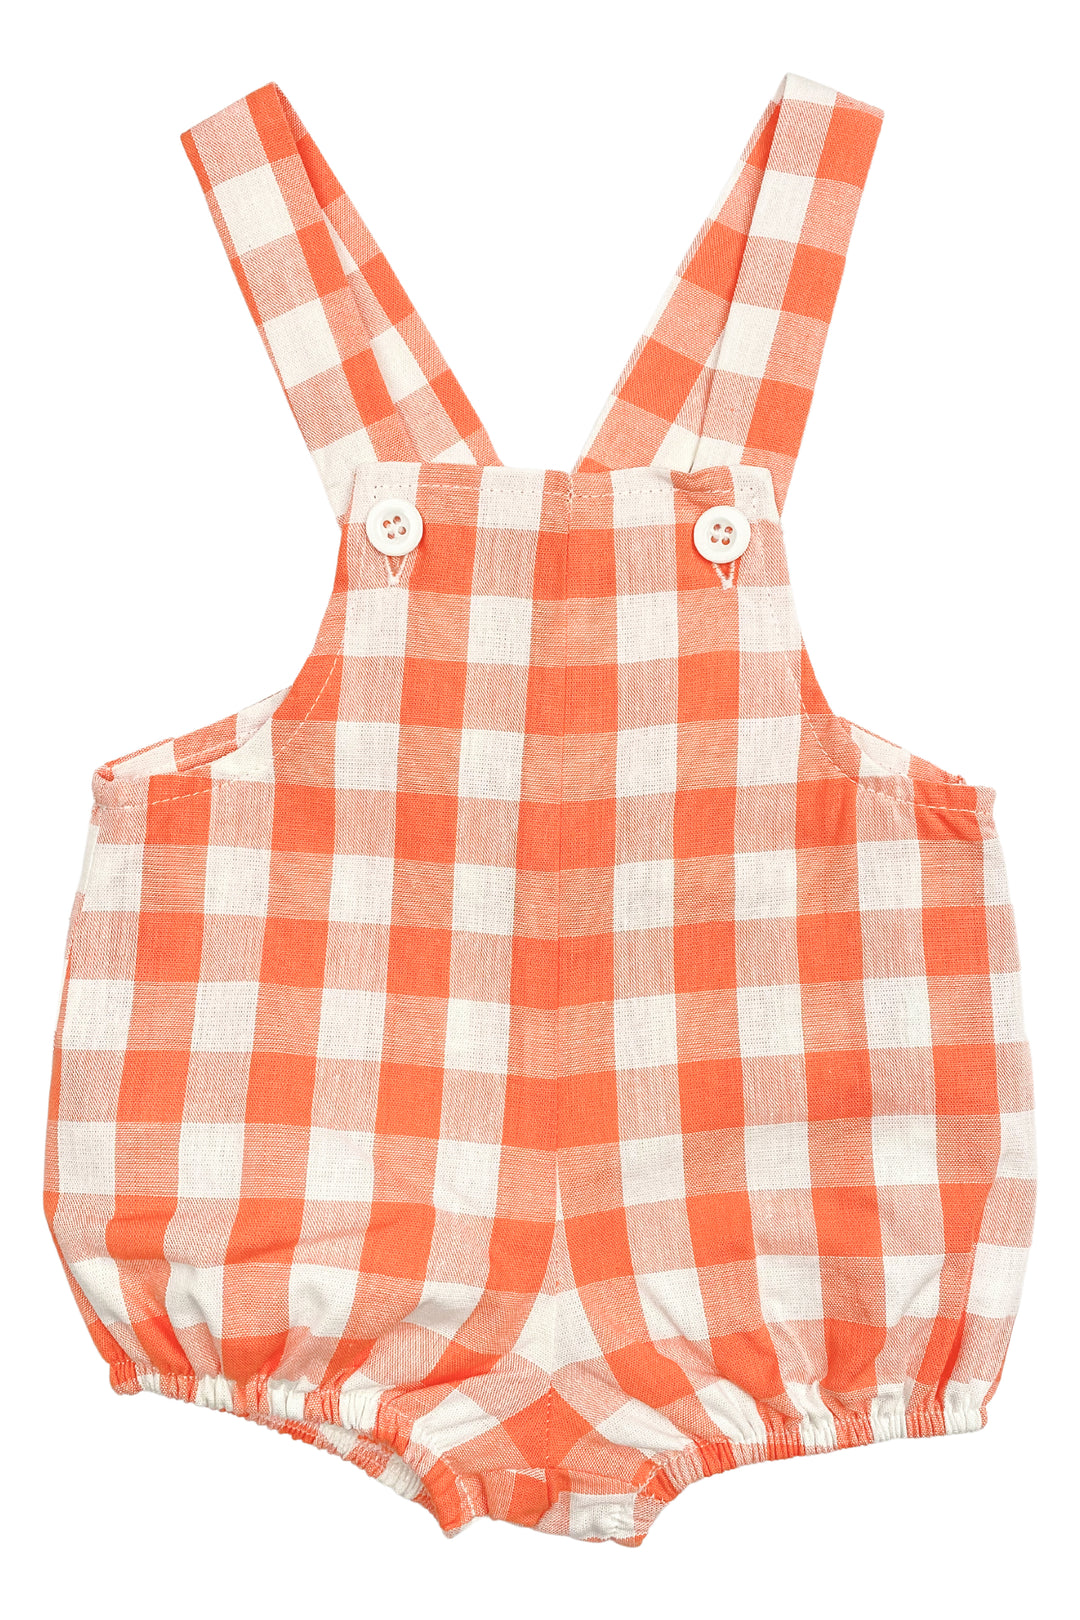 Cocote "Max" Gingham Dungaree Romper | Millie and John